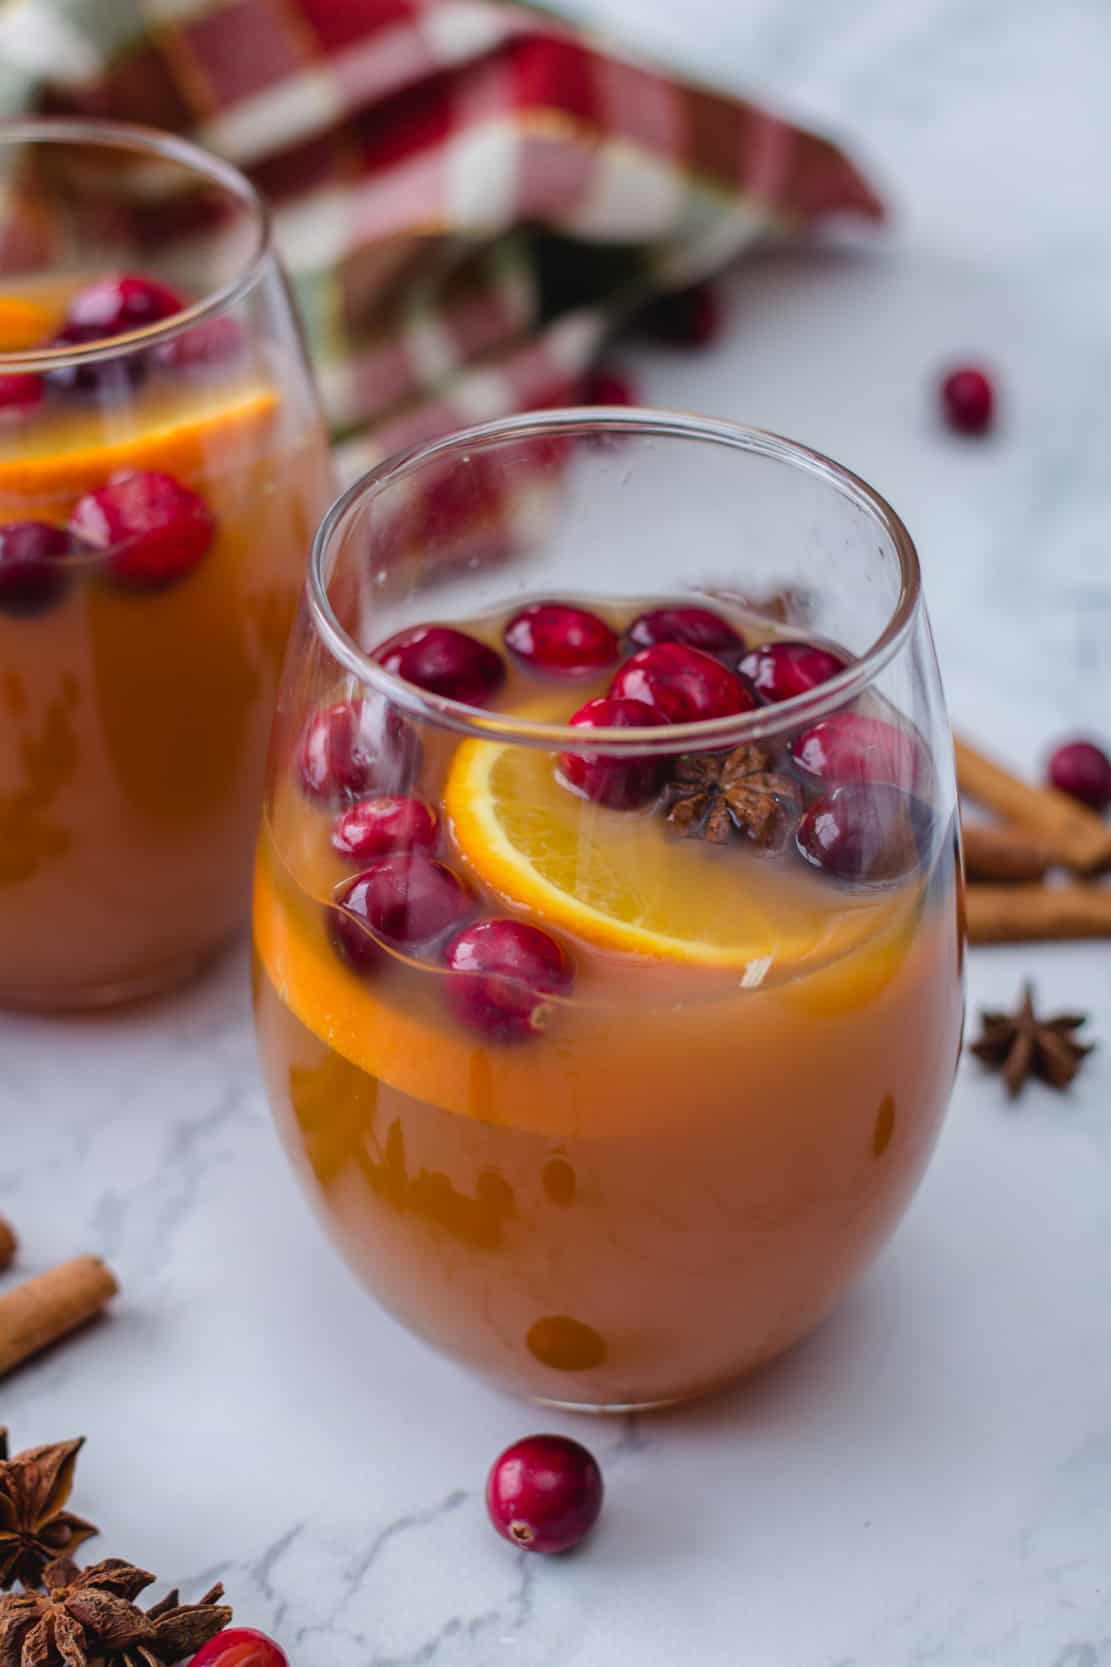 Apple Cider and pear cider in in a glass with cranberries on top